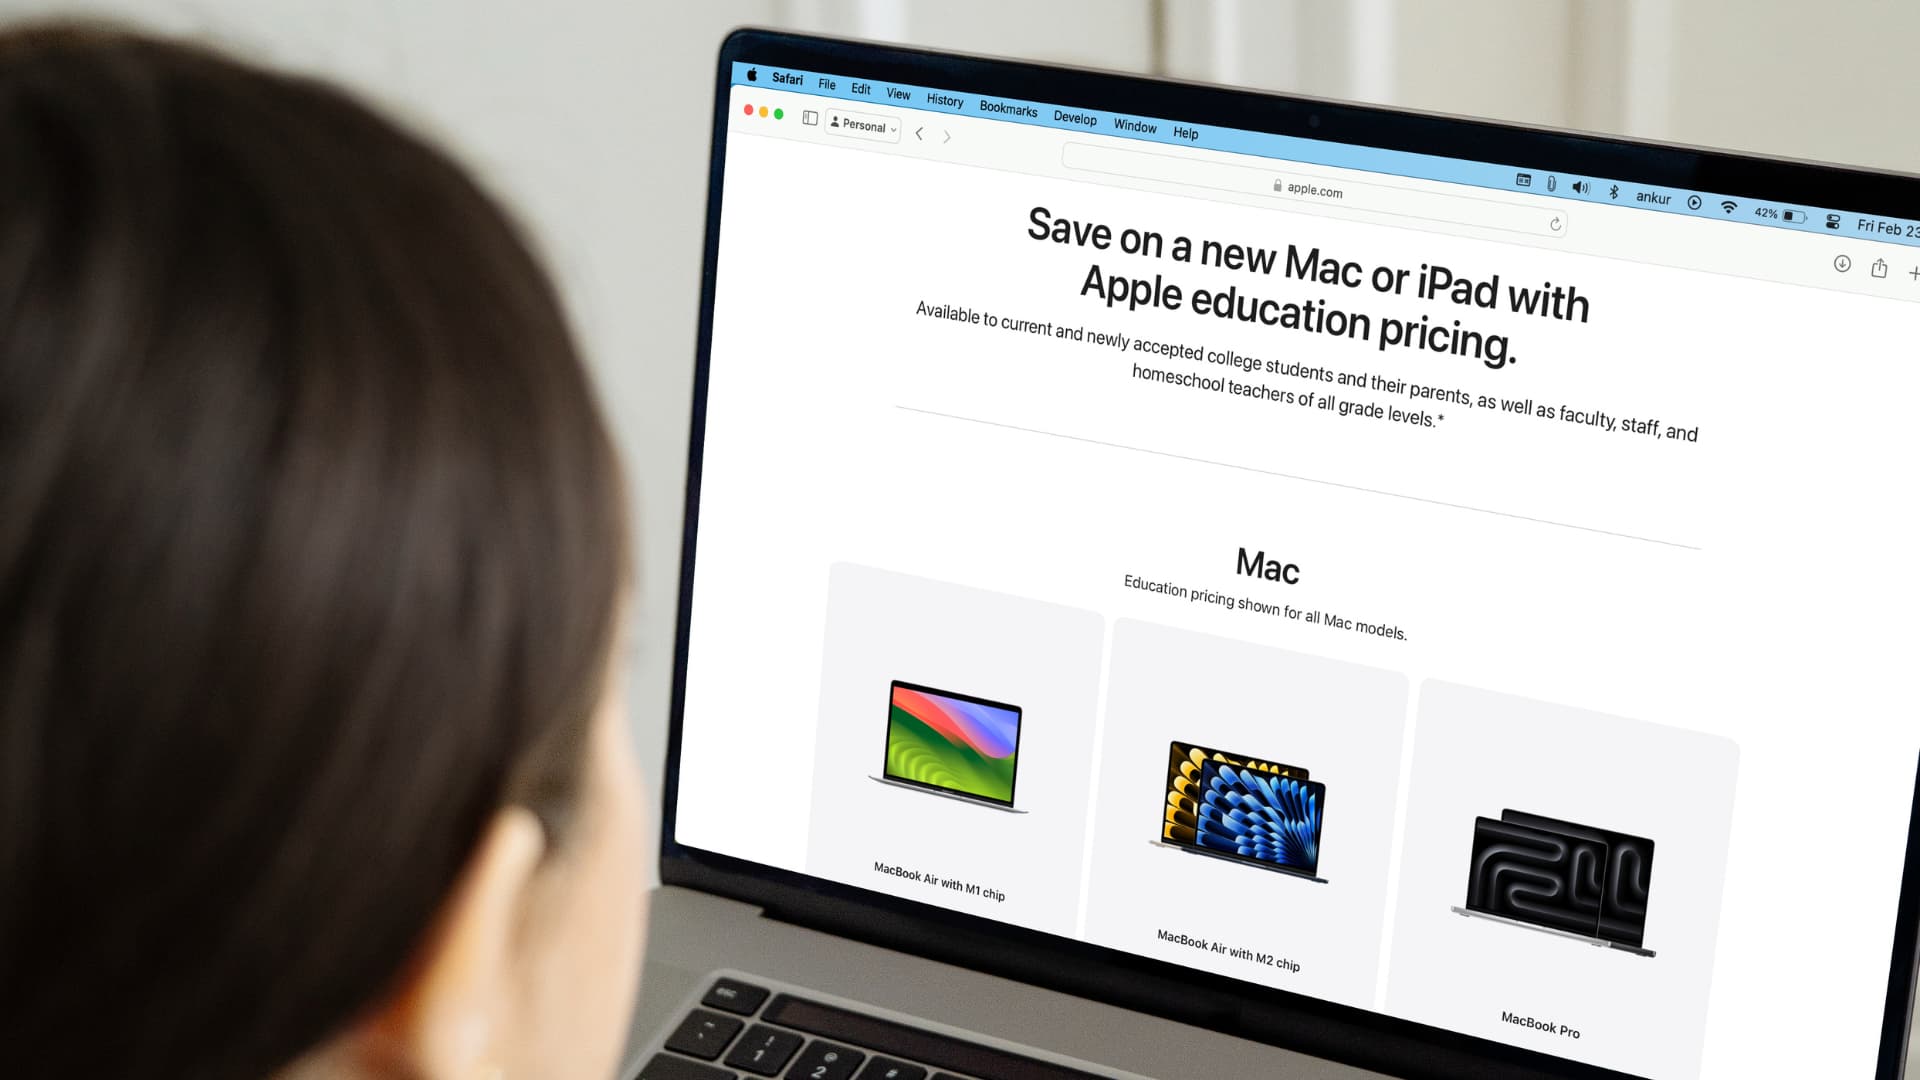 How to get Education Pricing and Student Discounts on Apple products